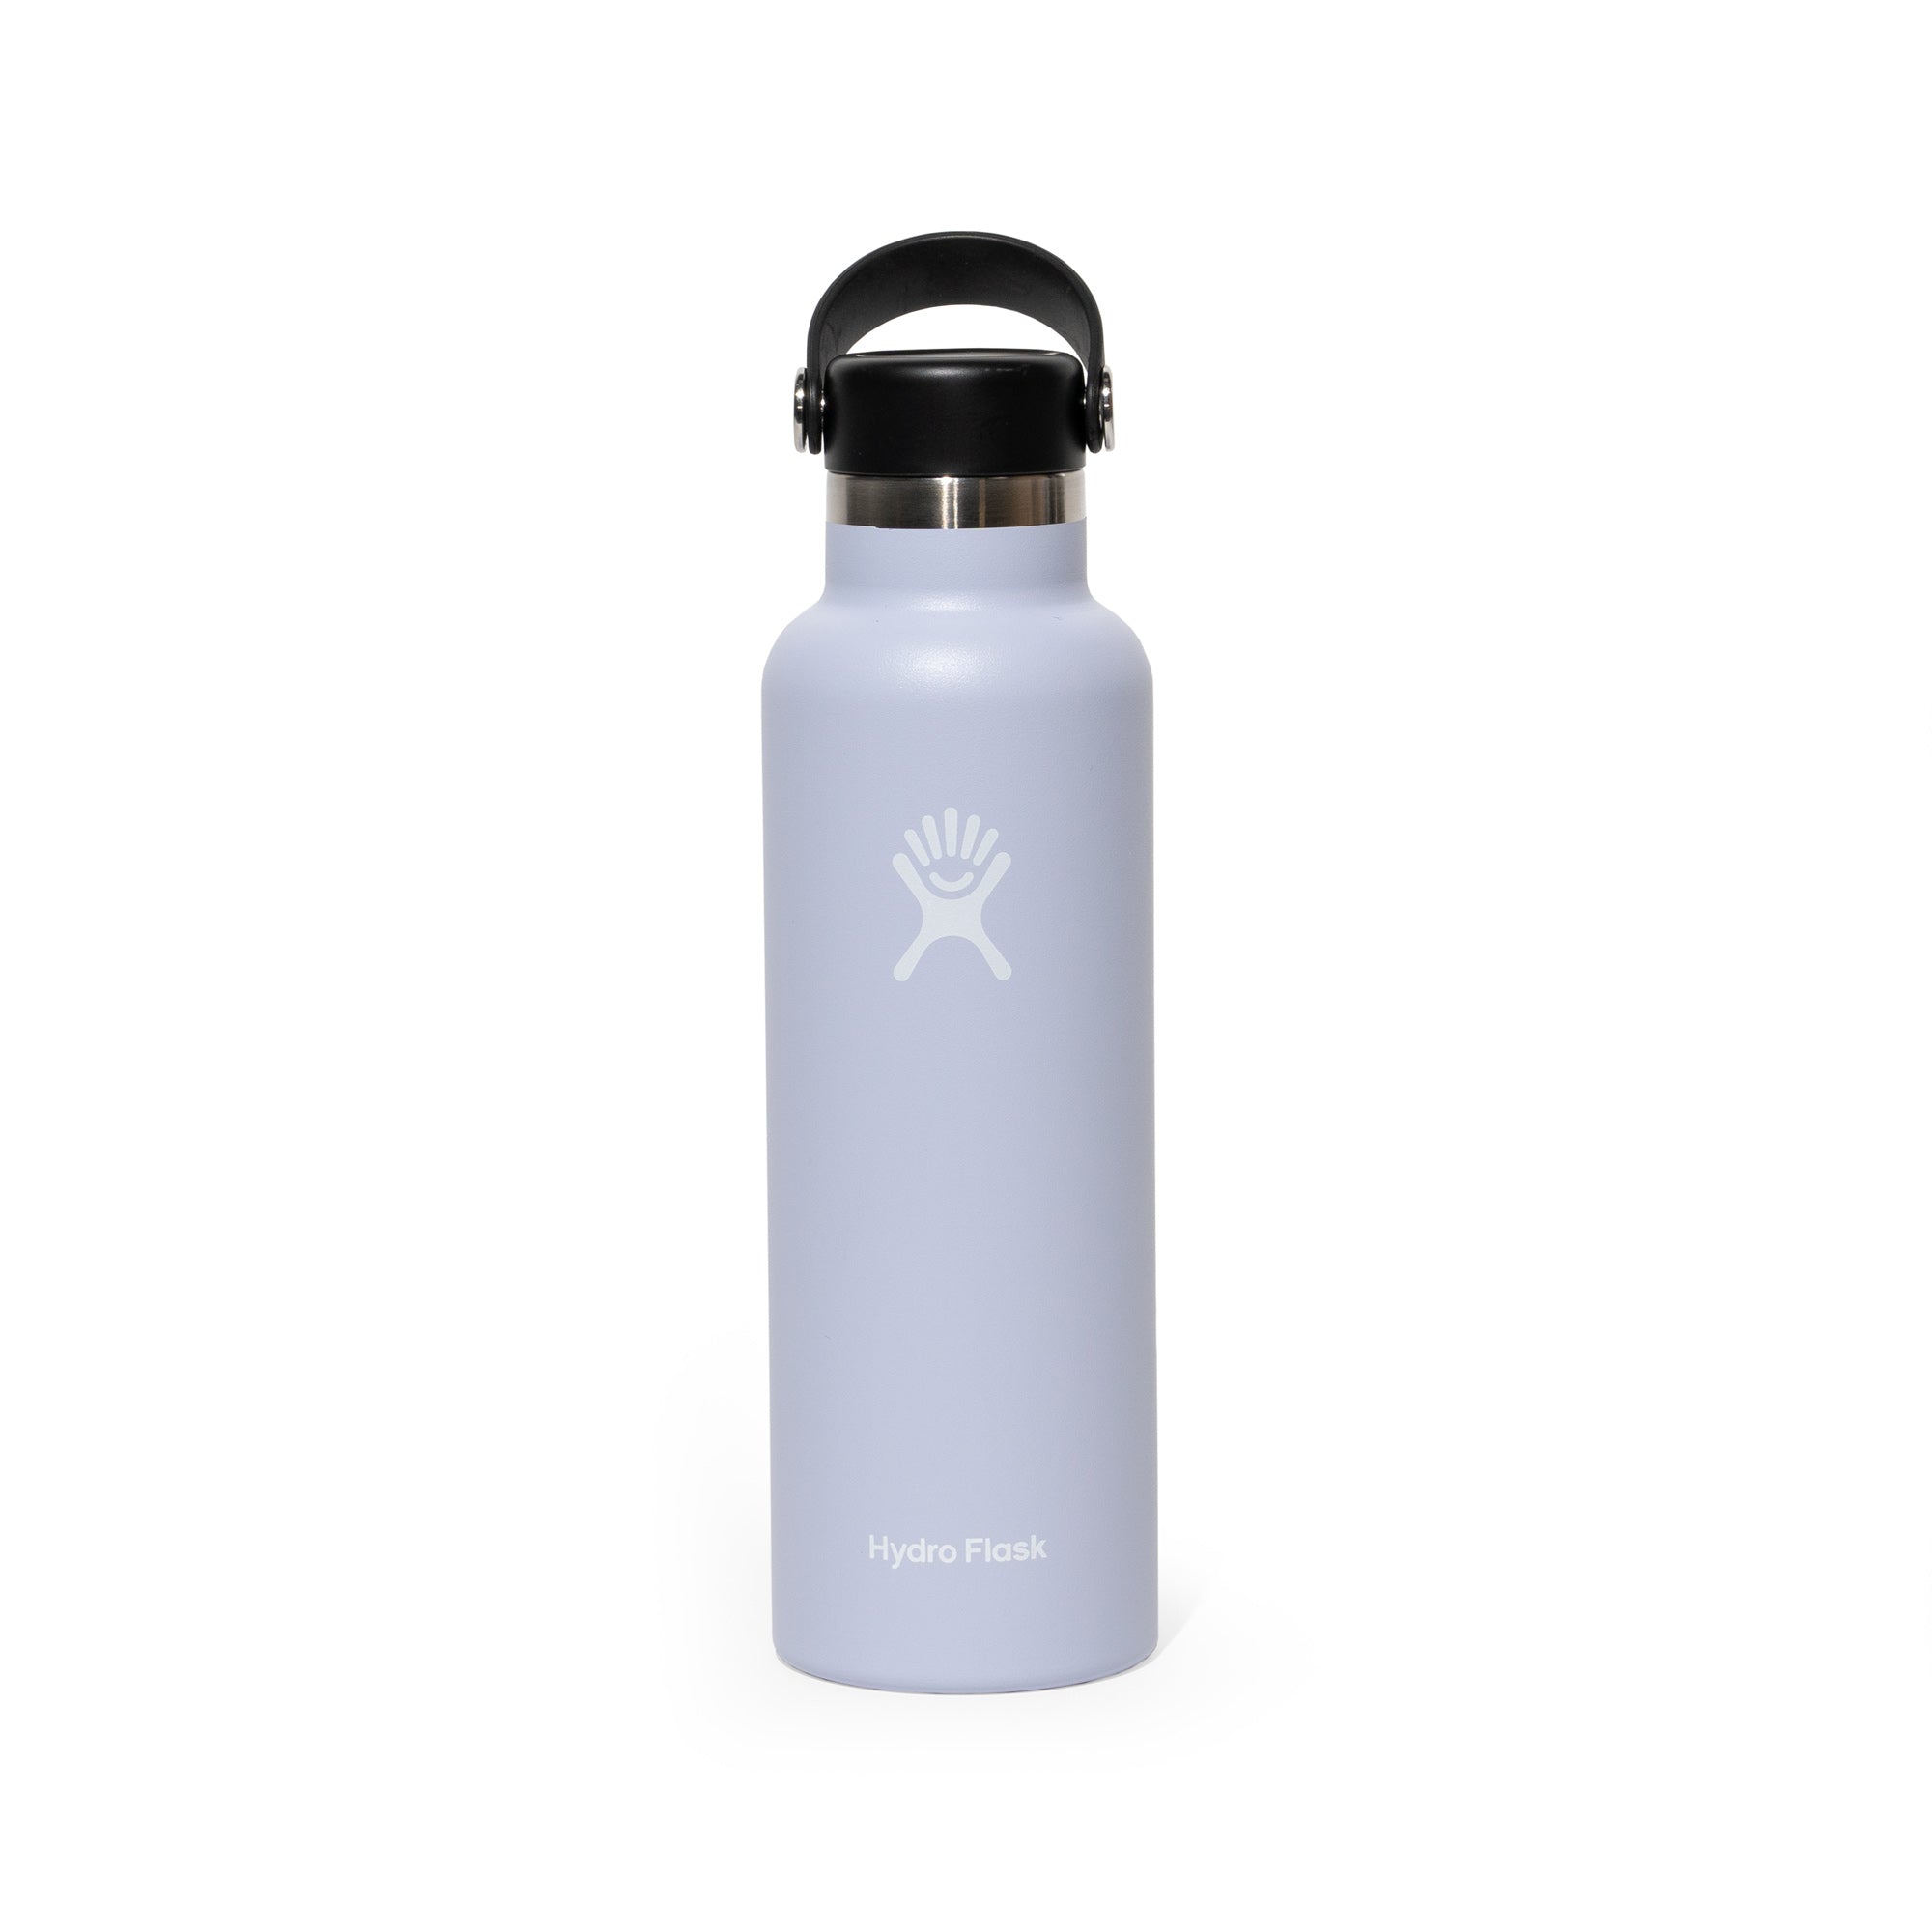 What's so special about Hydro Flask? Why is Hydroflask so